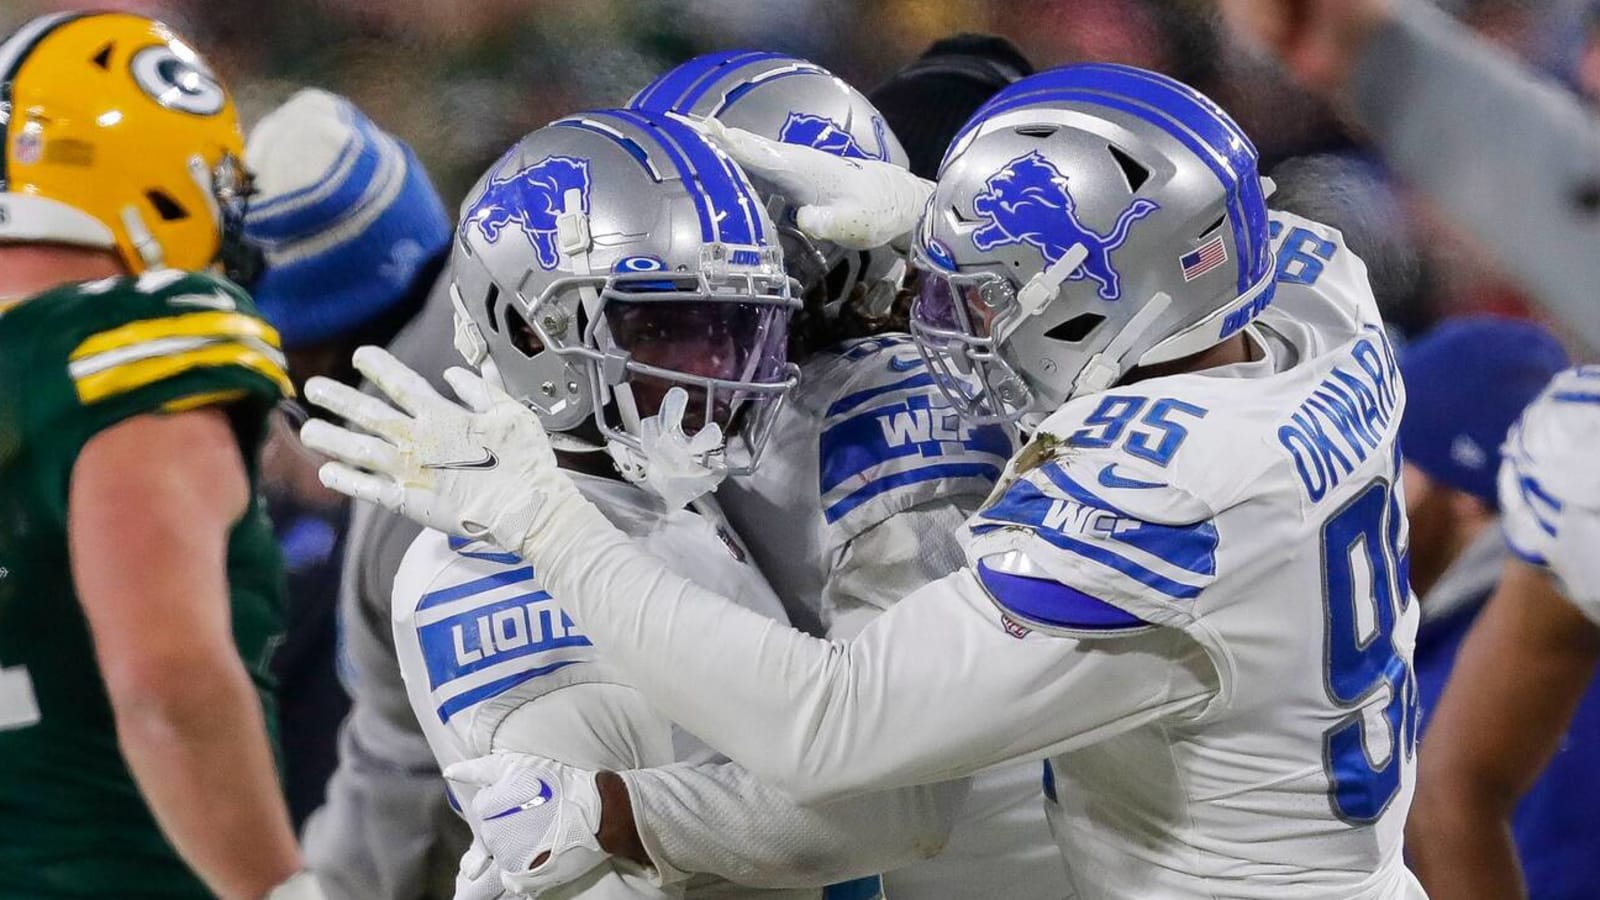 Lions defender had pettiest tweet after knocking Packers out of playoffs